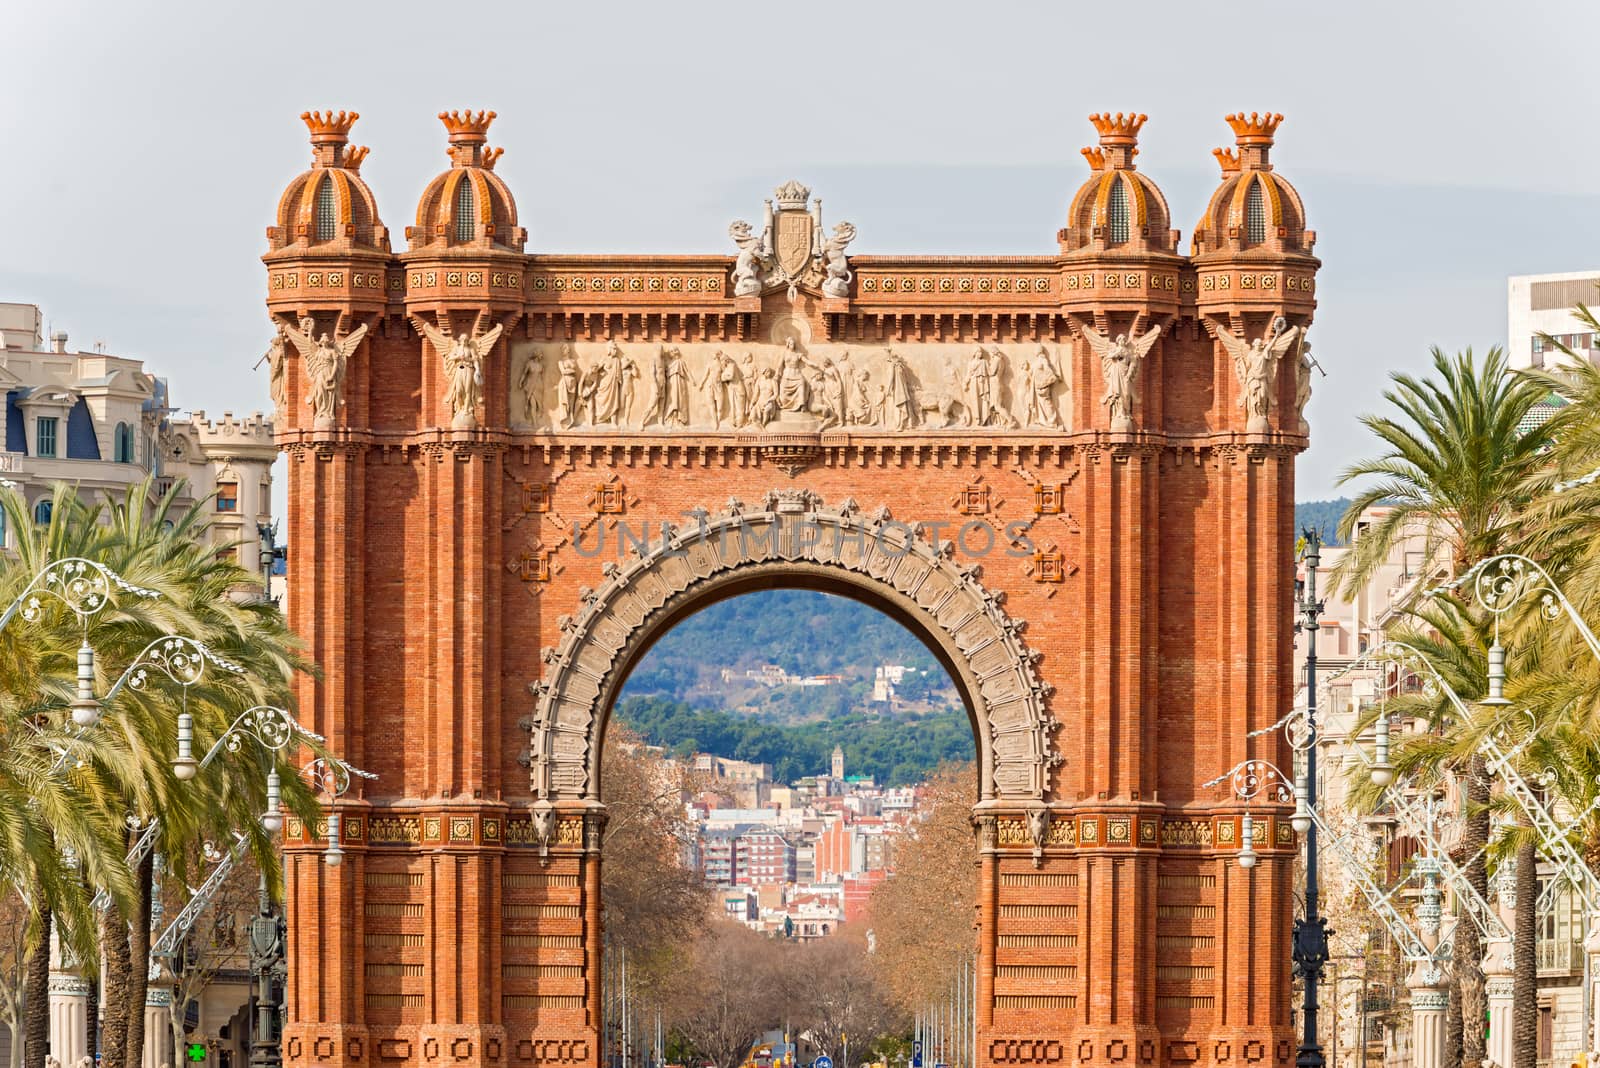 The Arch de Triumph in Barcelona, Spain. by Marcus